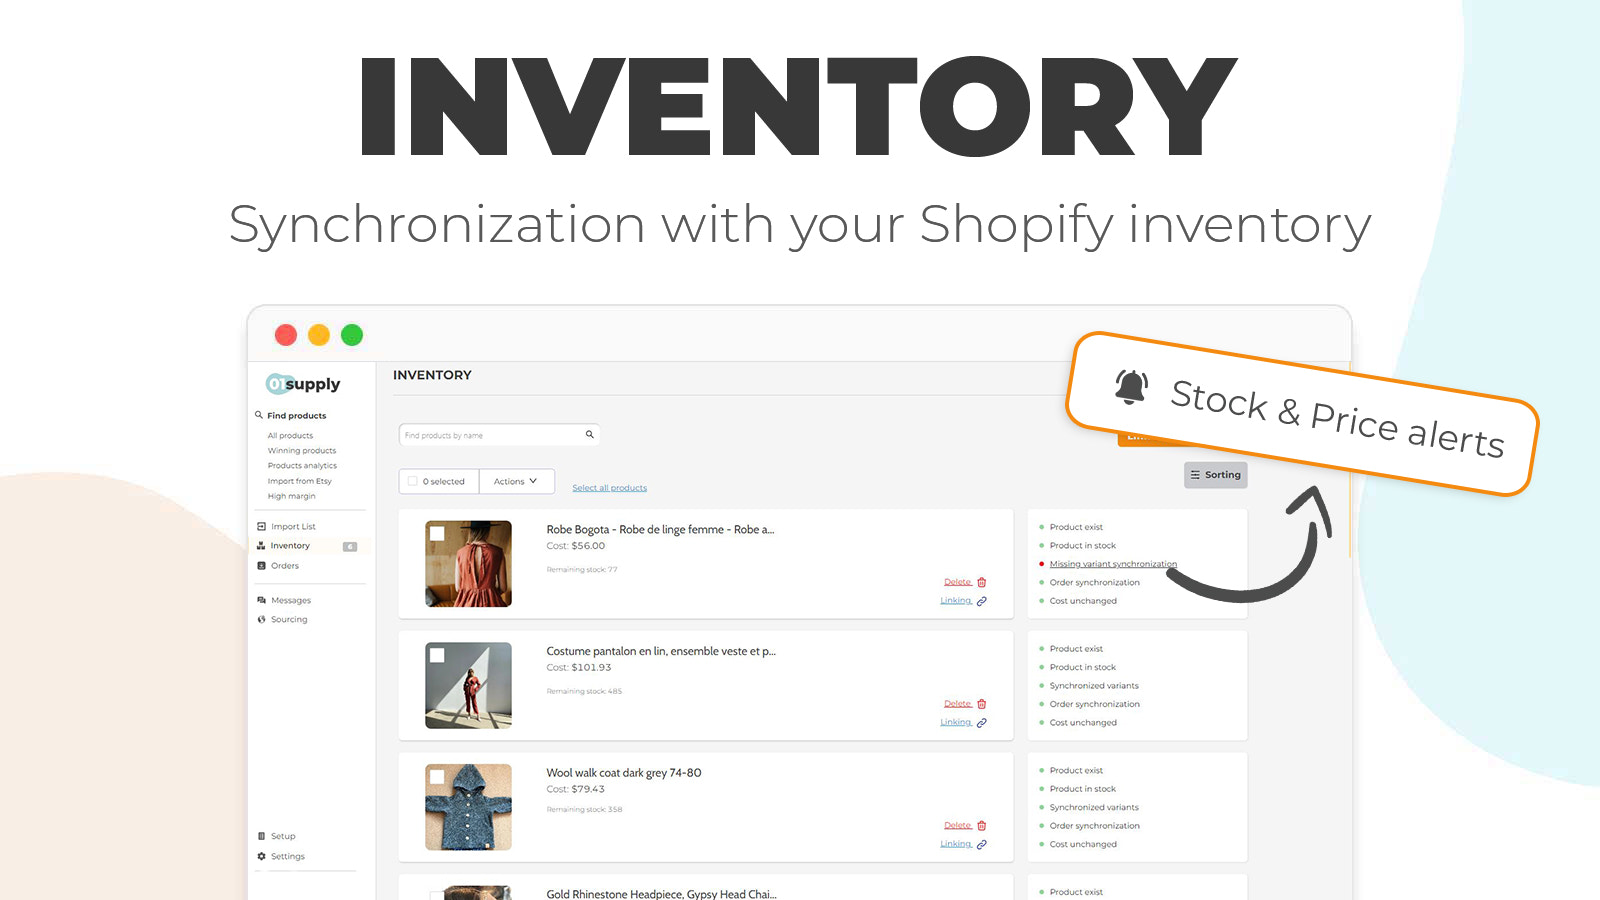 Synchronization with your Shopify inventory